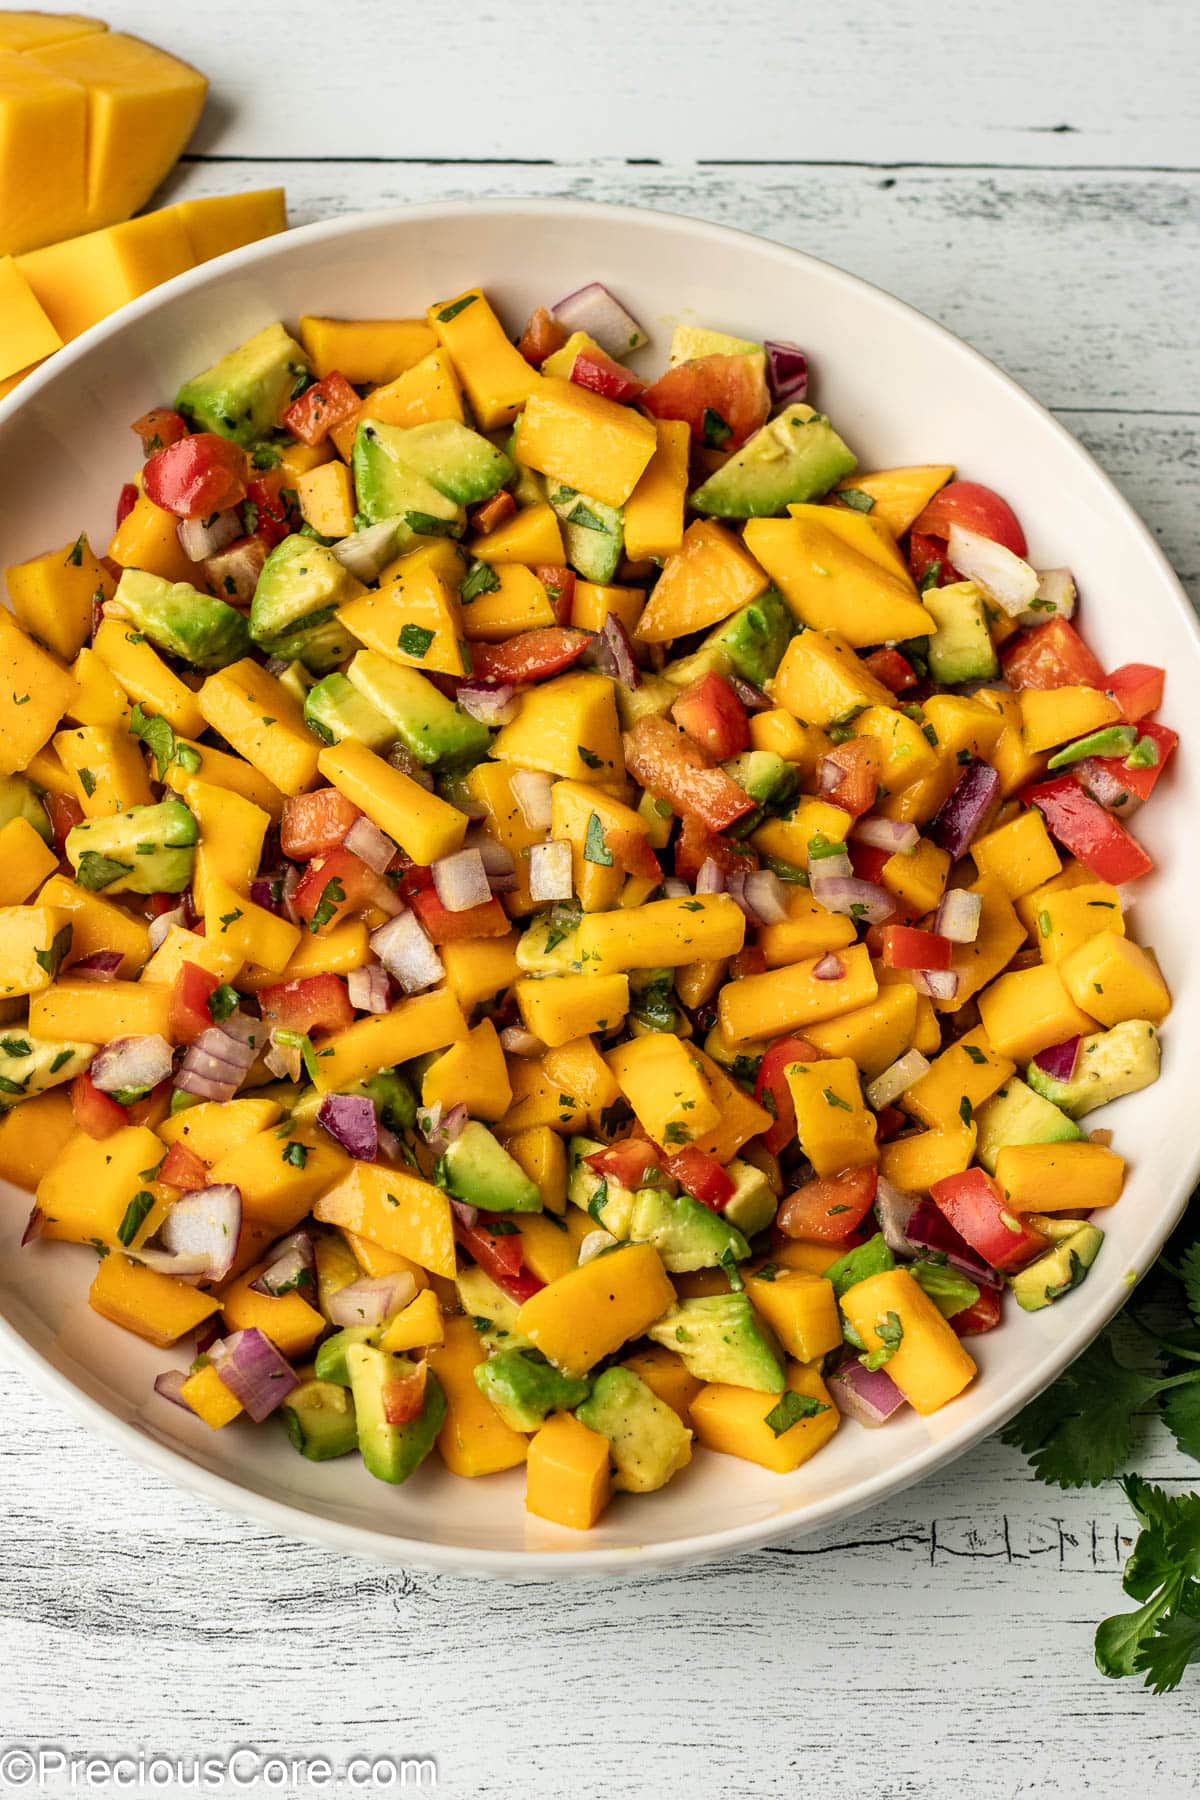 A bowl with diced mango, avocado, and other ingredients.